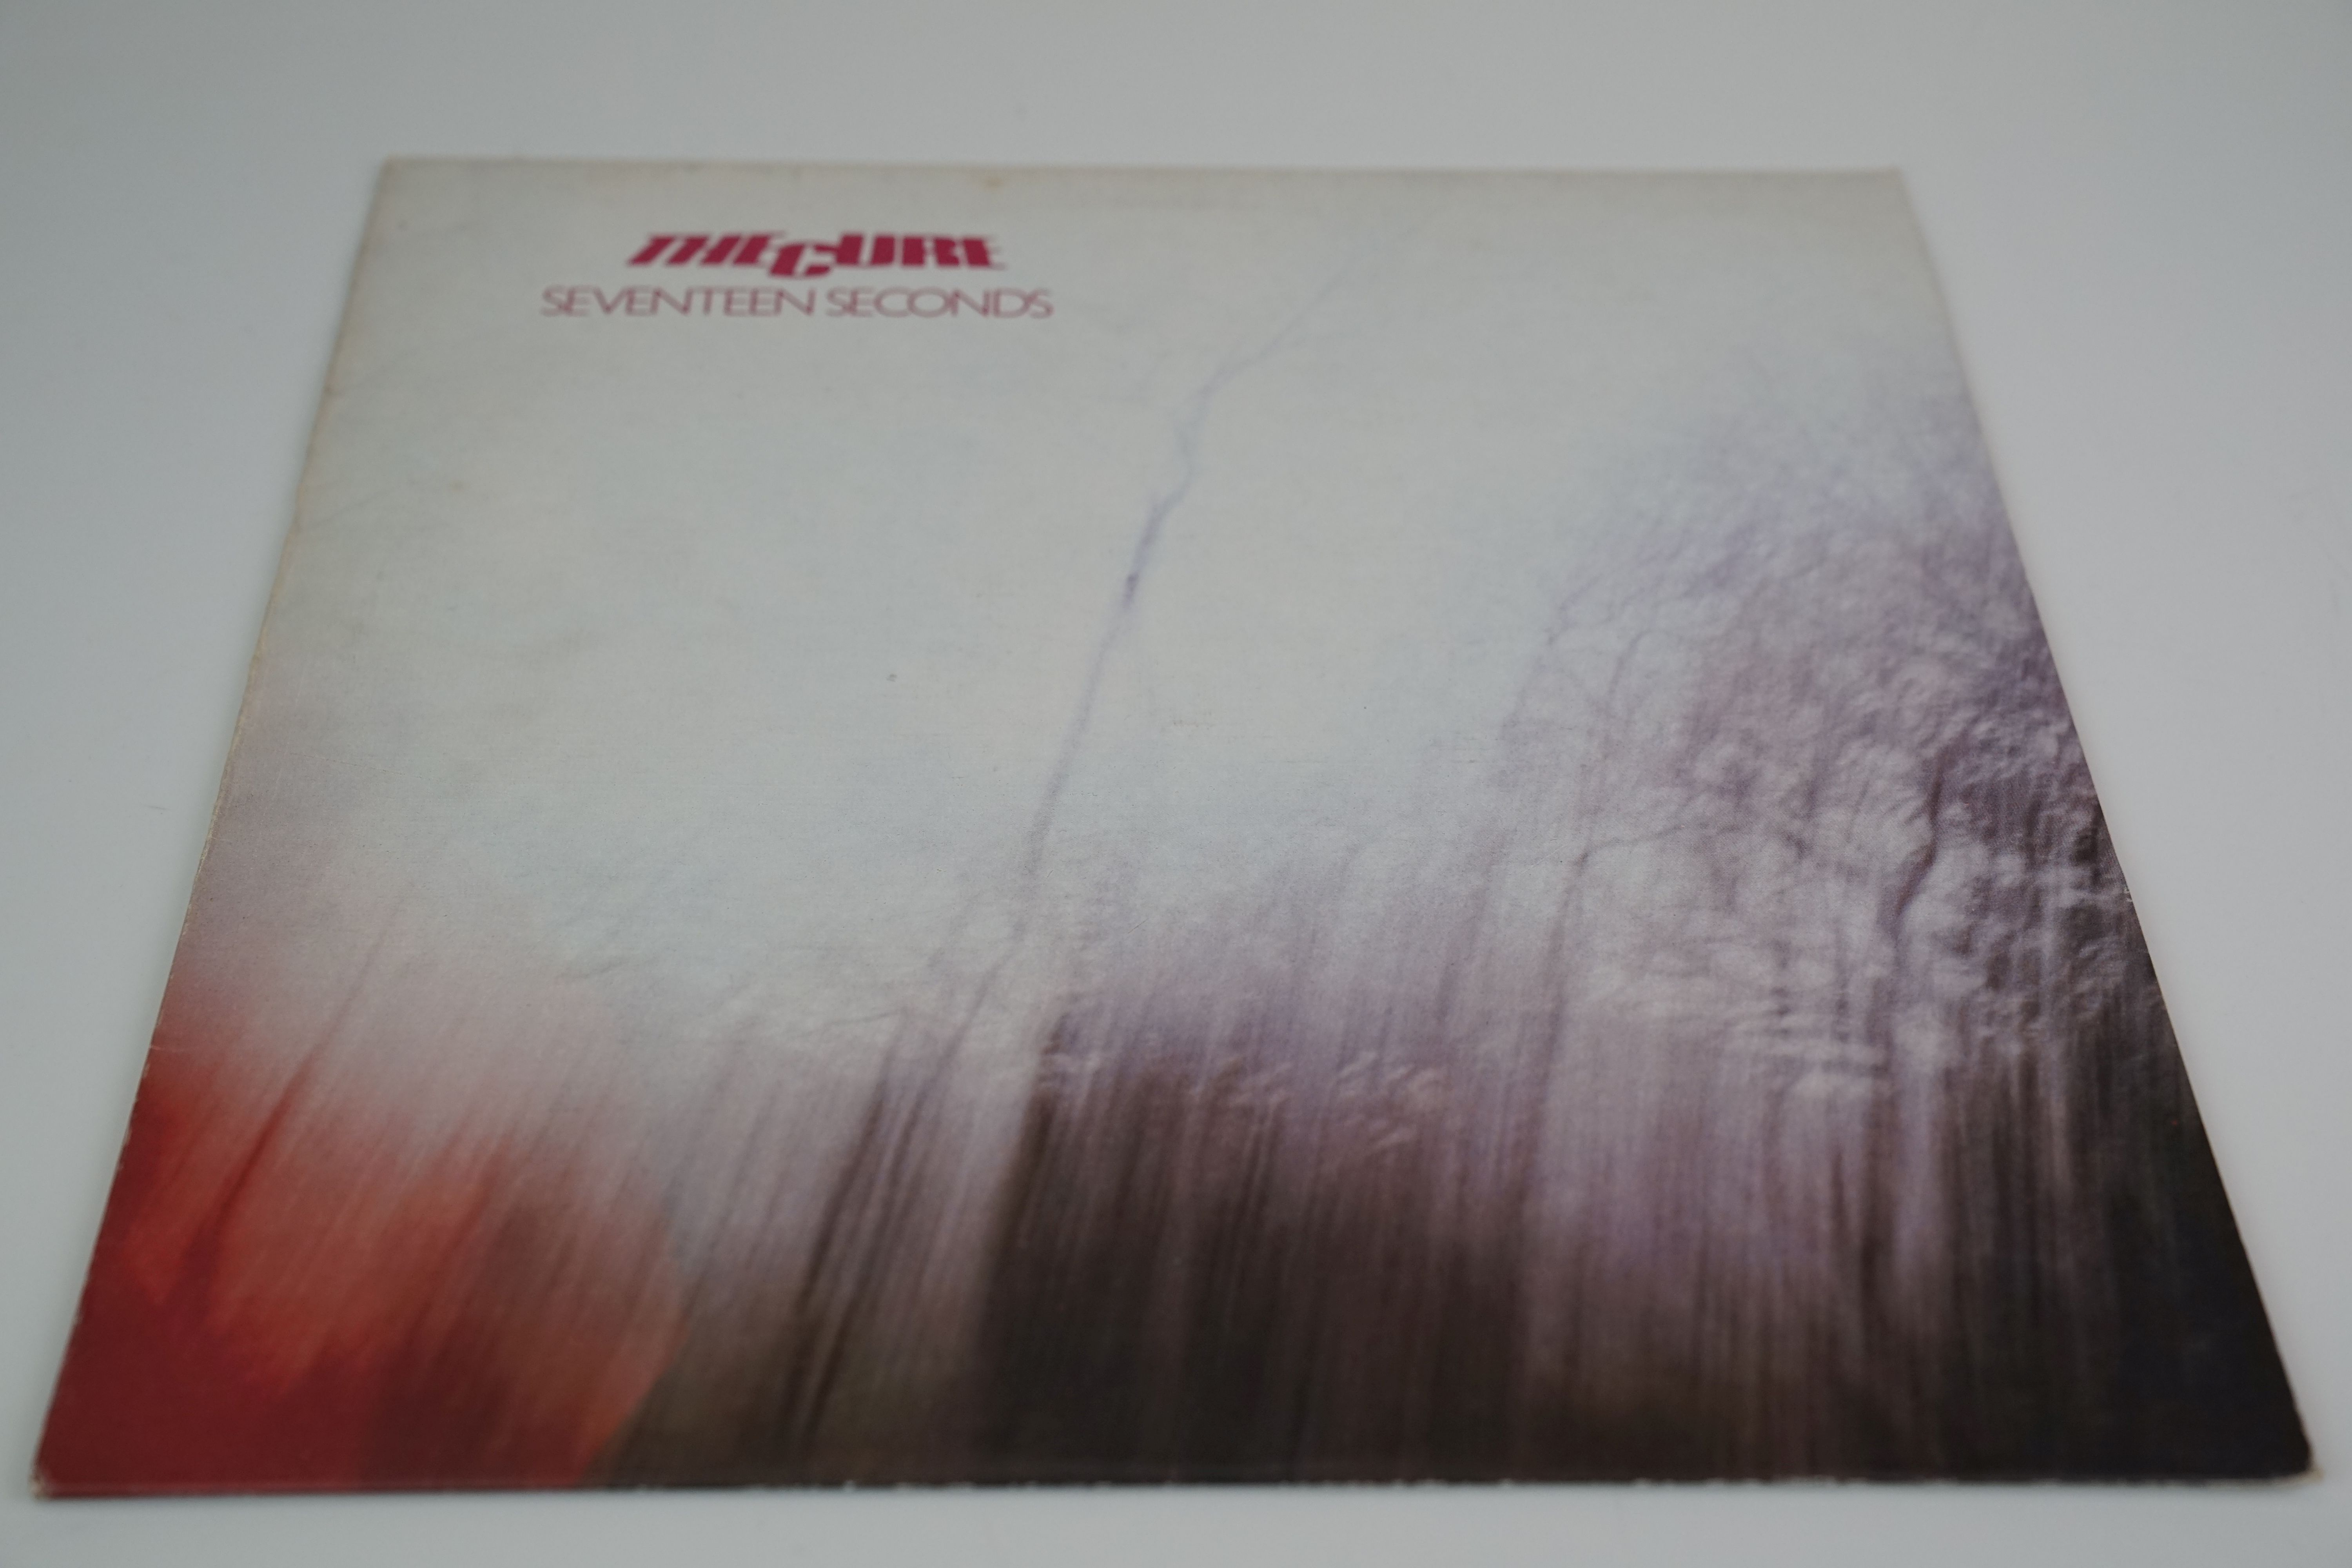 Vinyl - Four The Cure LPs to include Seventeen Seconds Friction FIX004, Three Imaginary Boys FIX1, - Image 2 of 24